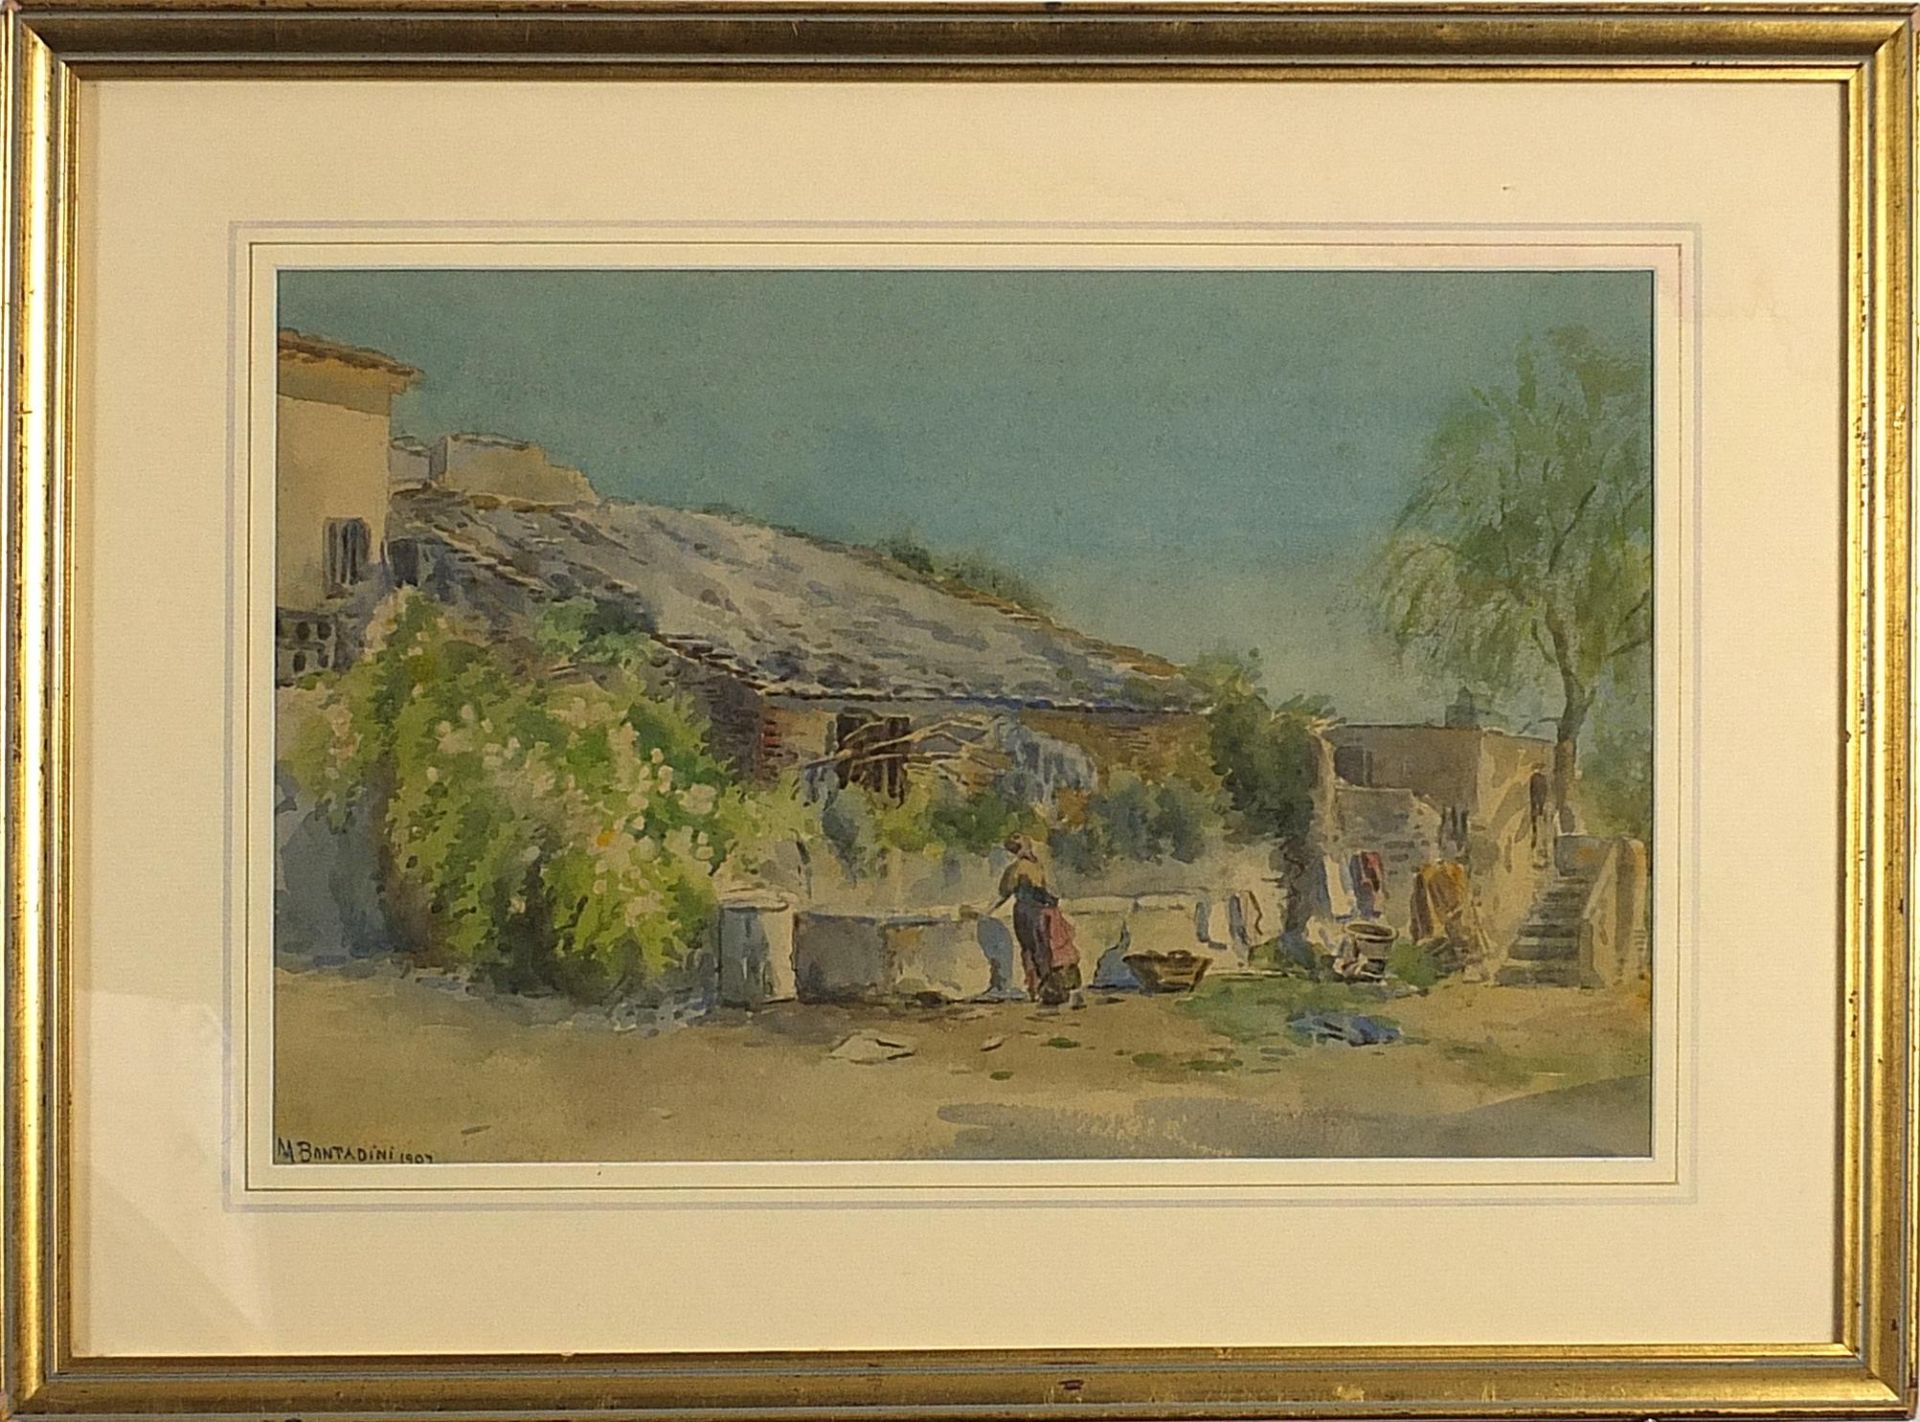 M Bantandini 1907 - Village scene with figures, Middle Eastern watercolour, mounted, framed and - Image 2 of 4